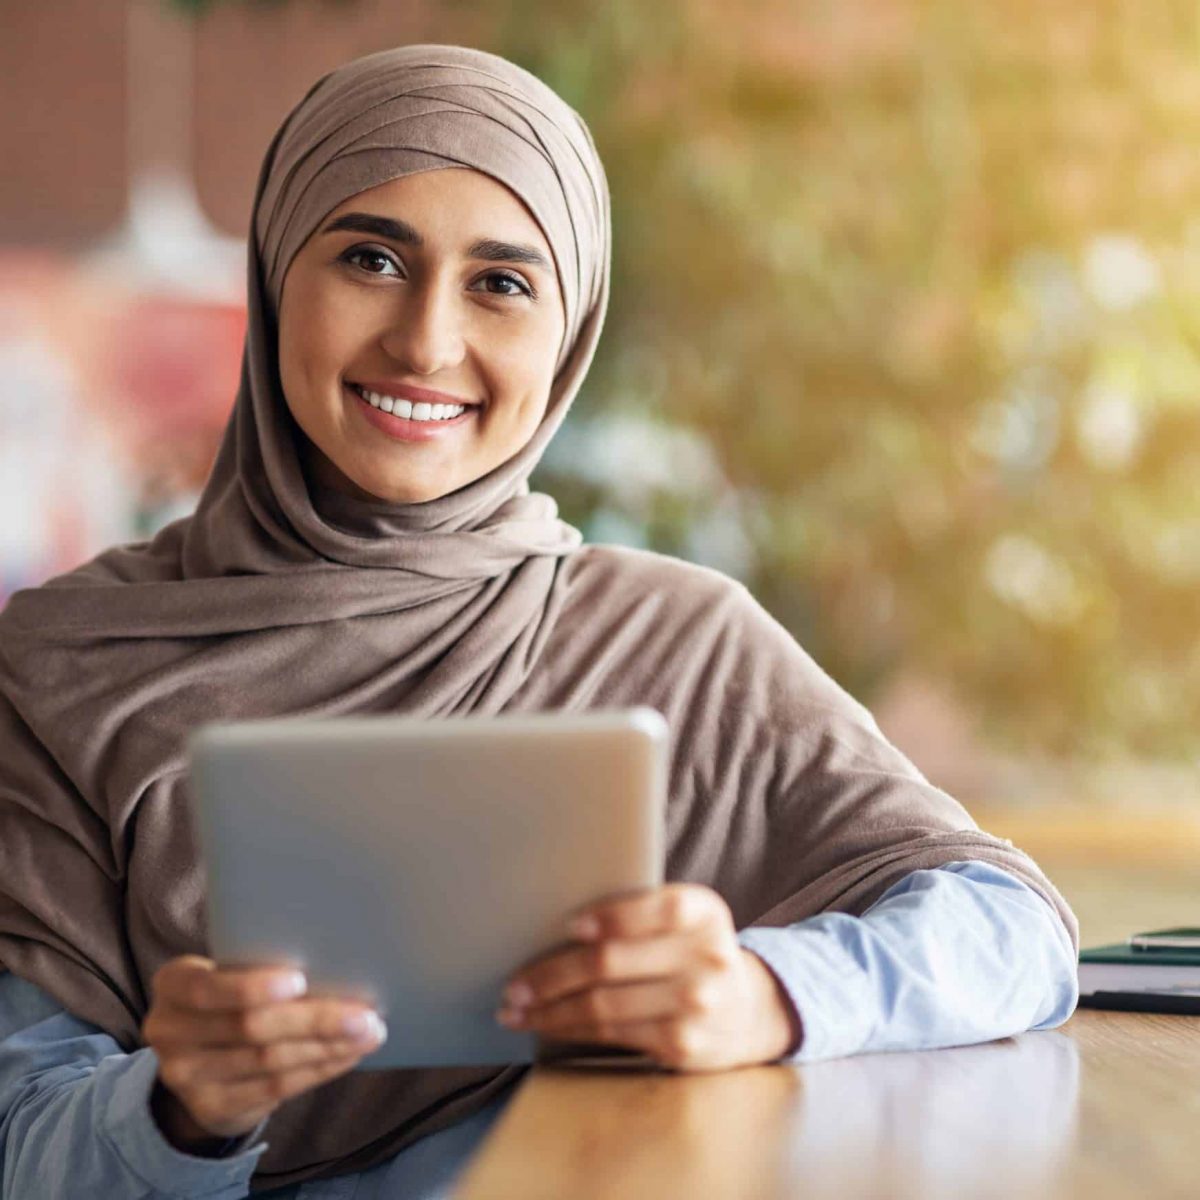 Happy girl in hijab with digital tablet smiling at camera, sitting at cafe alone, copy space